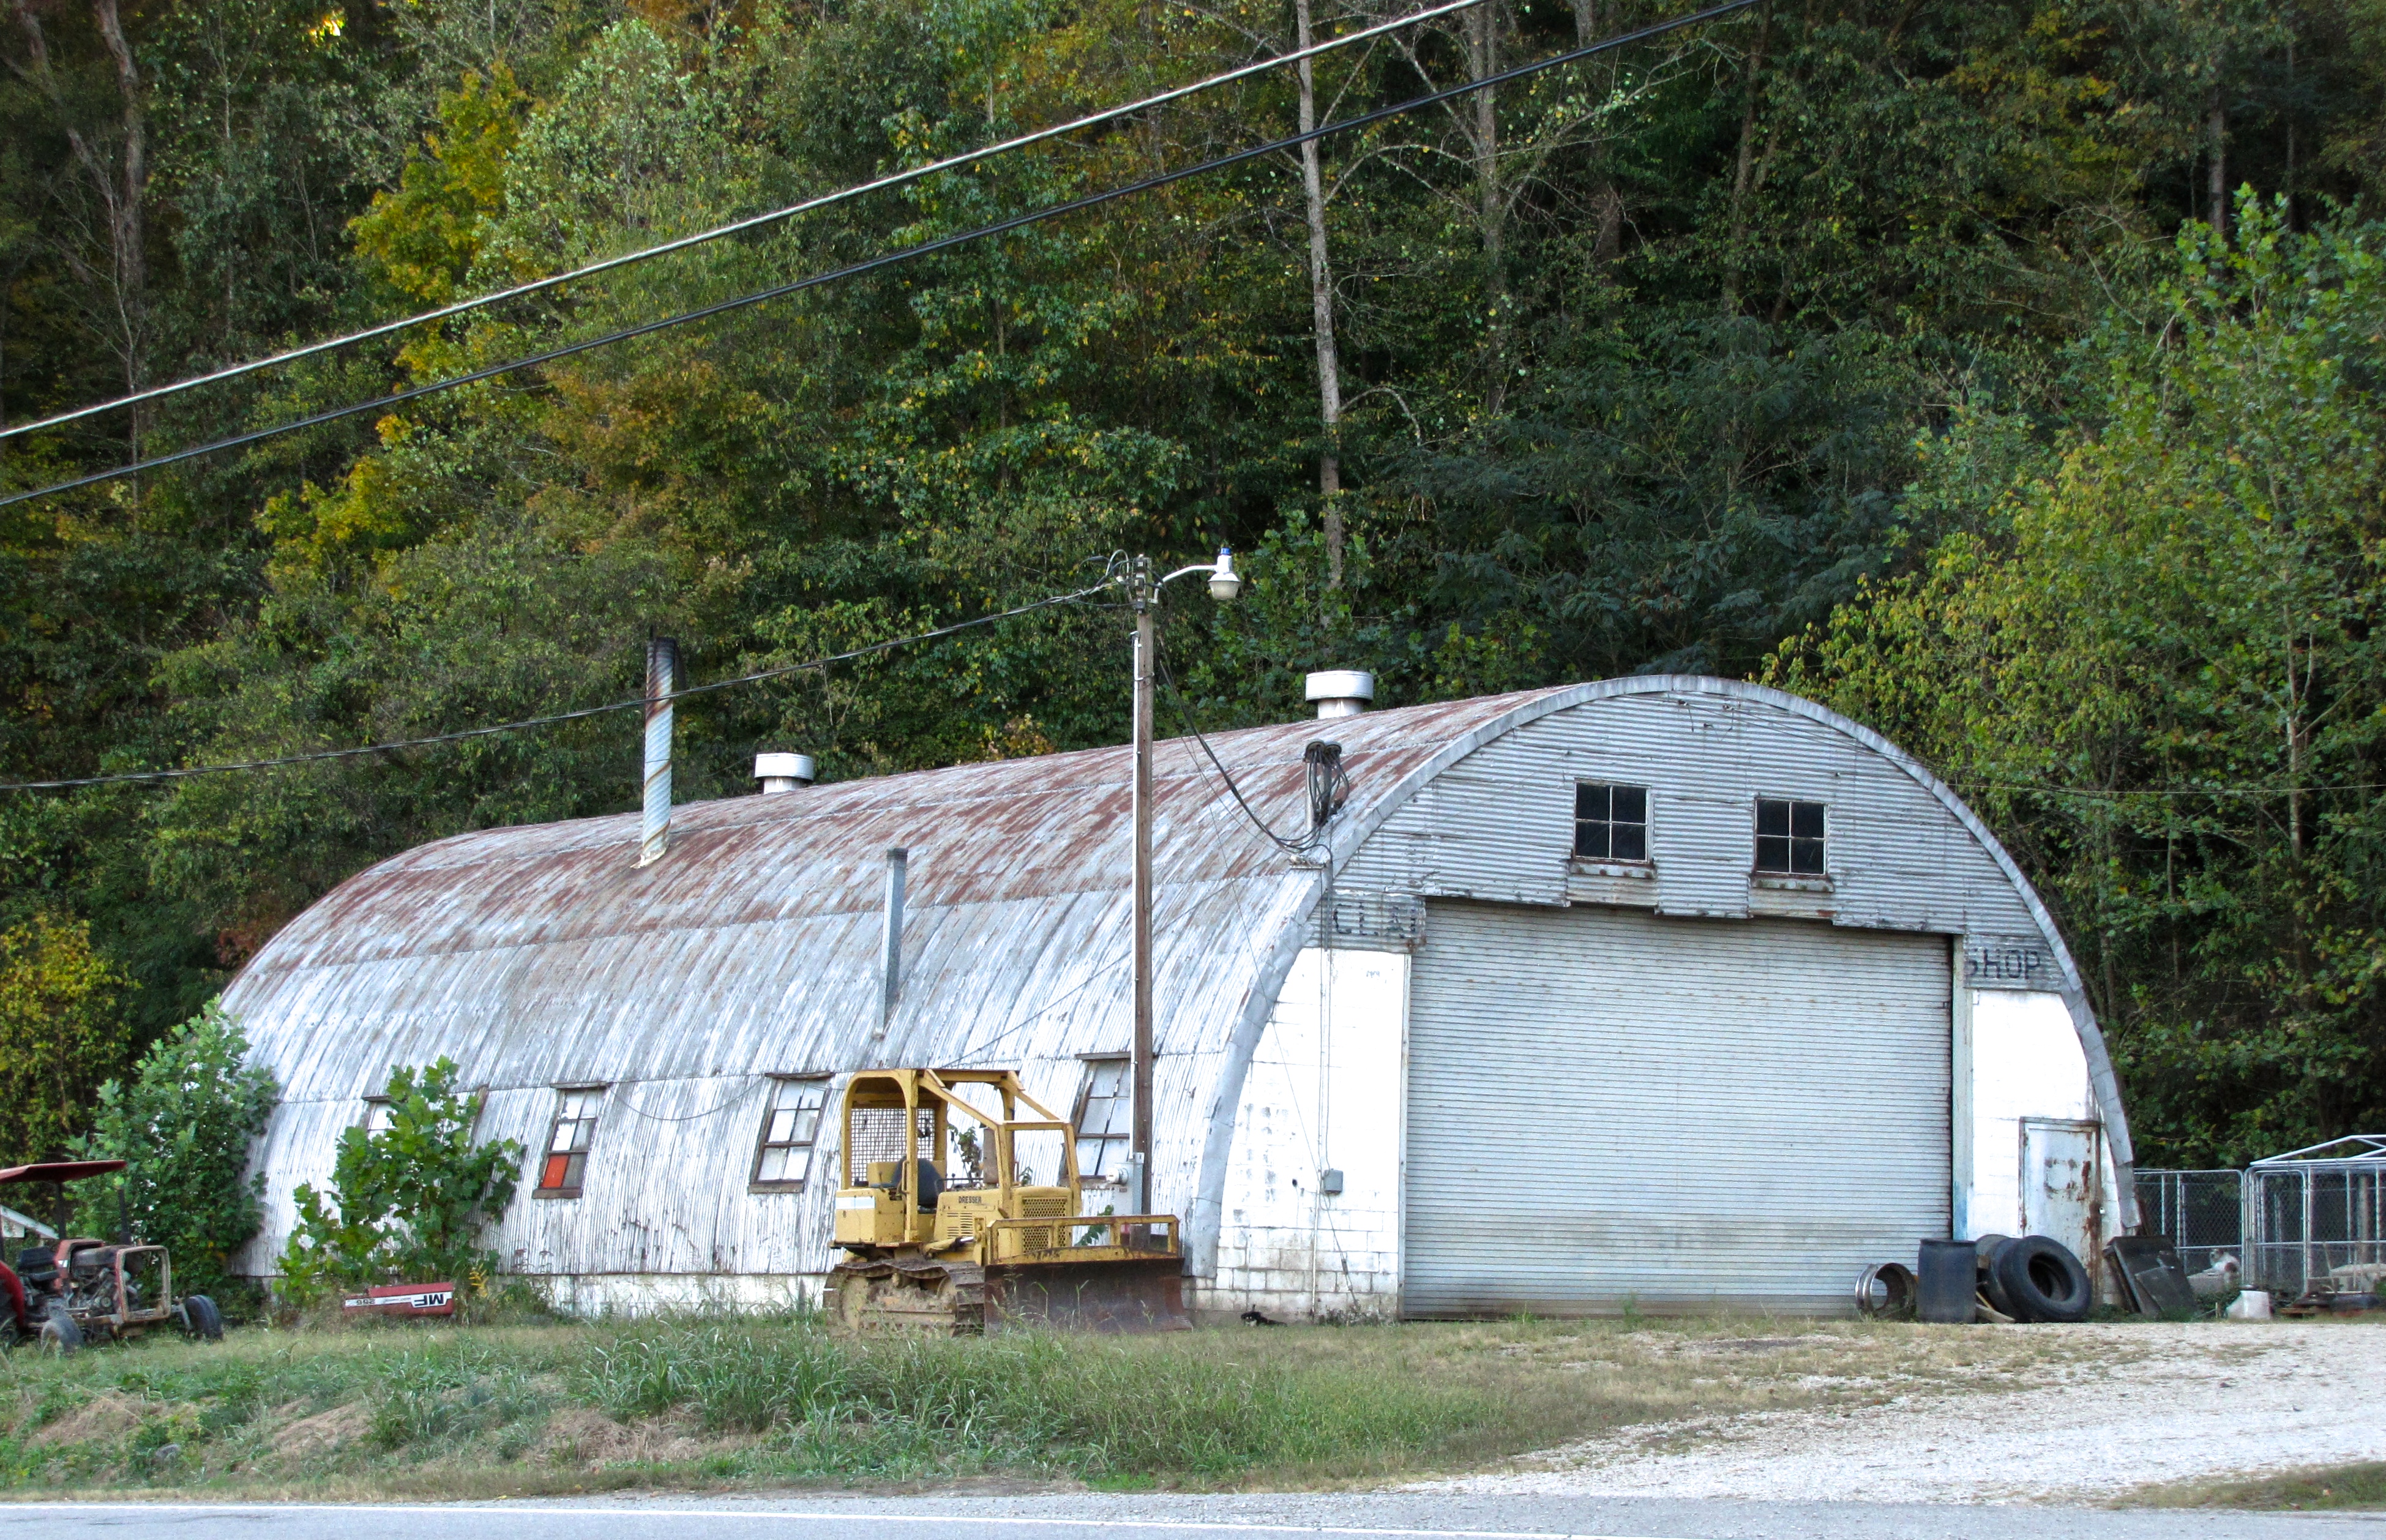 quonset hut in Terms Of Service, MO